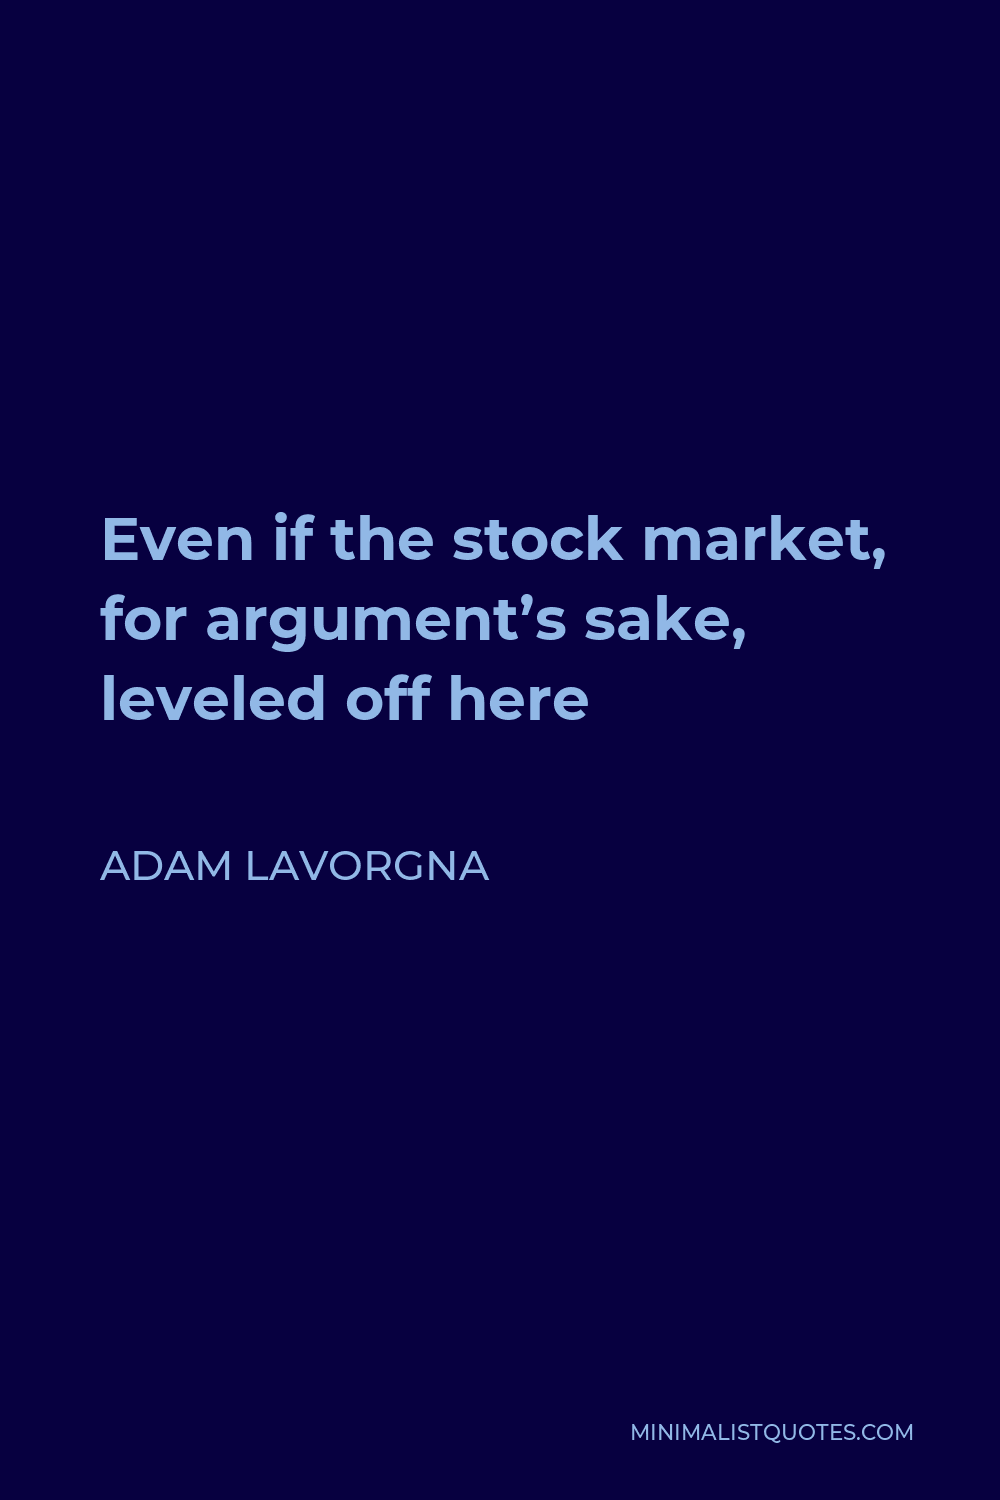 Adam LaVorgna Quote - Even if the stock market, for argument’s sake, leveled off here